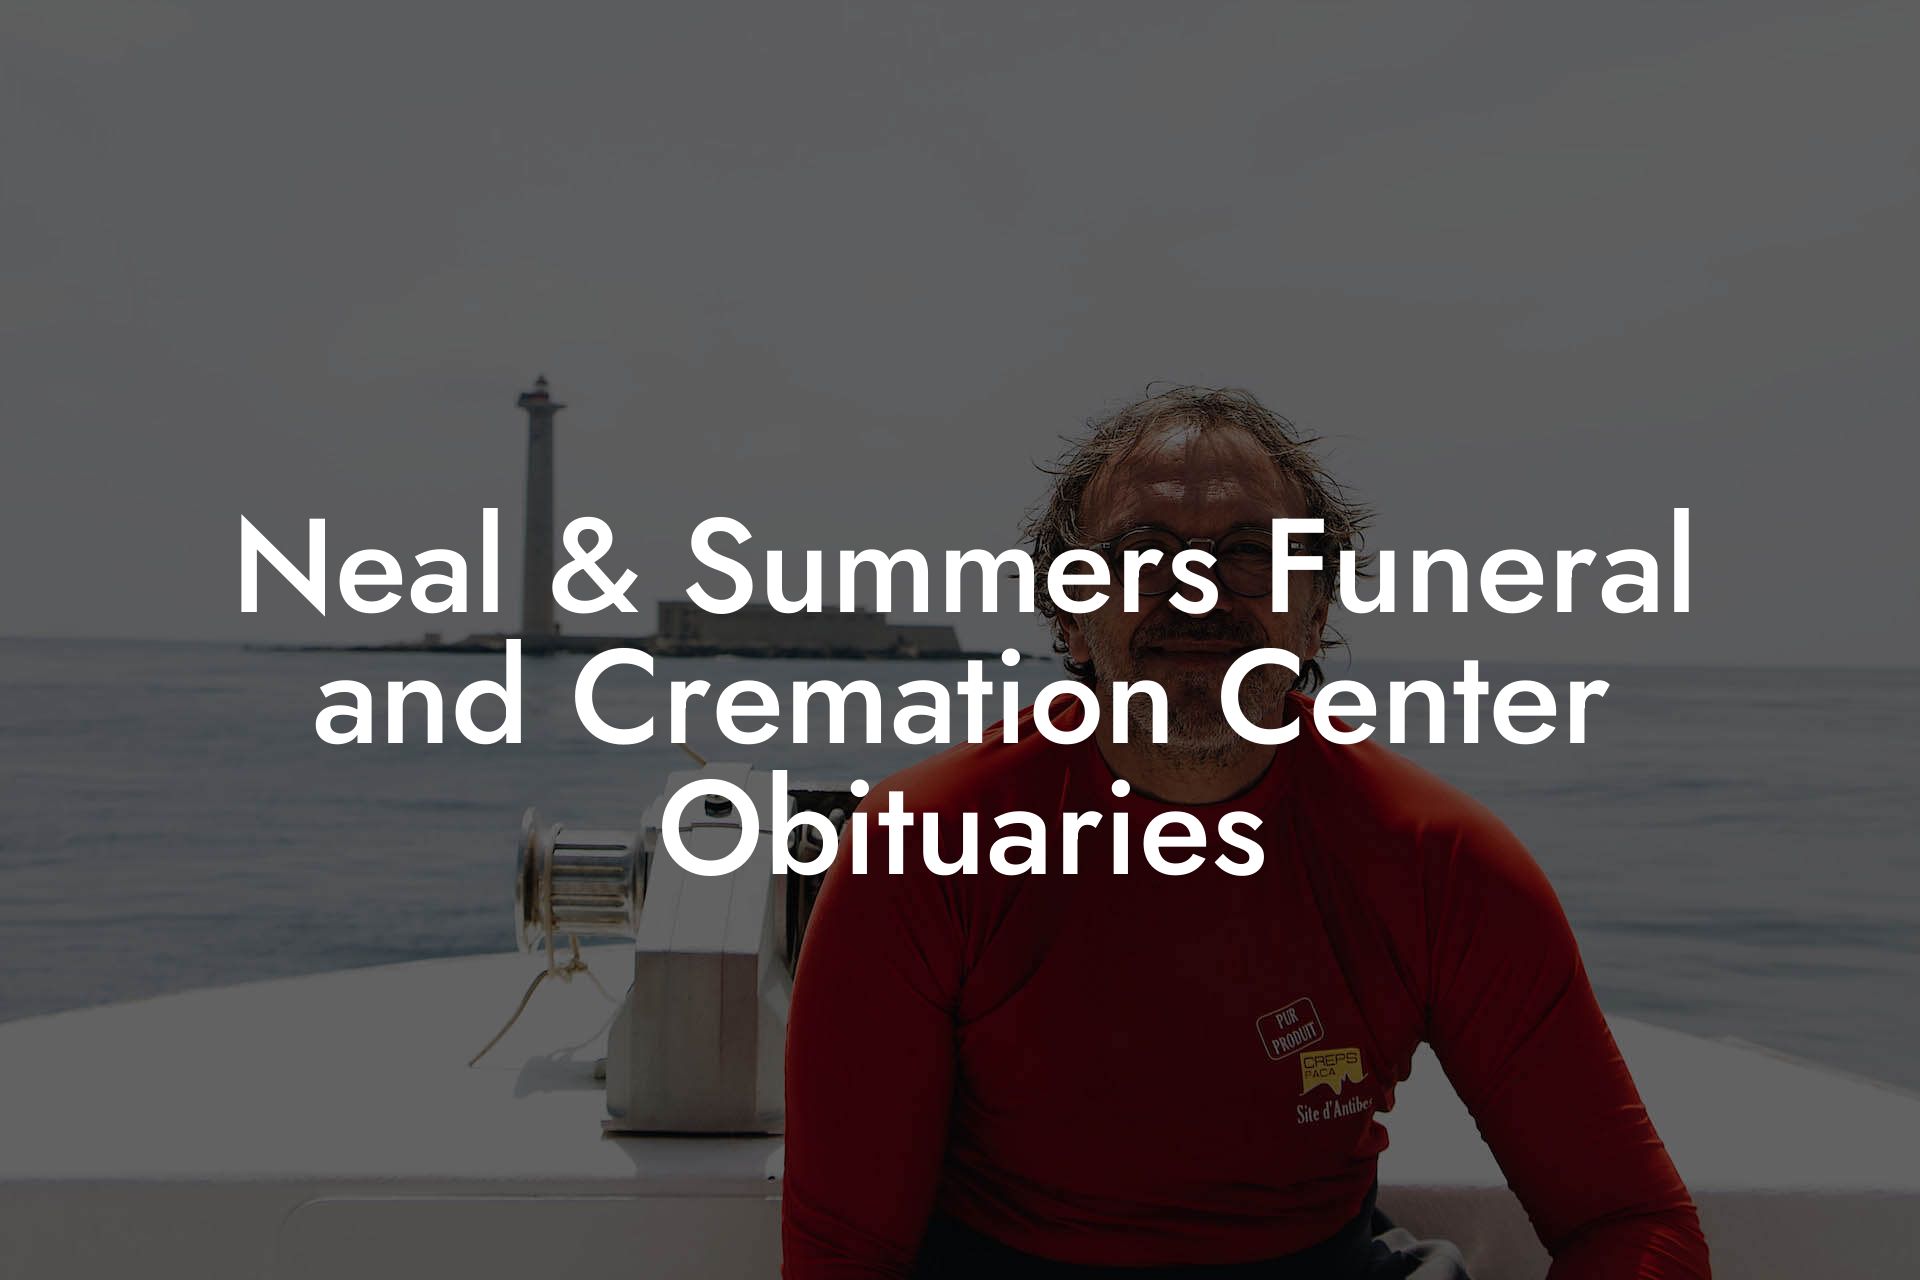 Neal & Summers Funeral and Cremation Center Obituaries